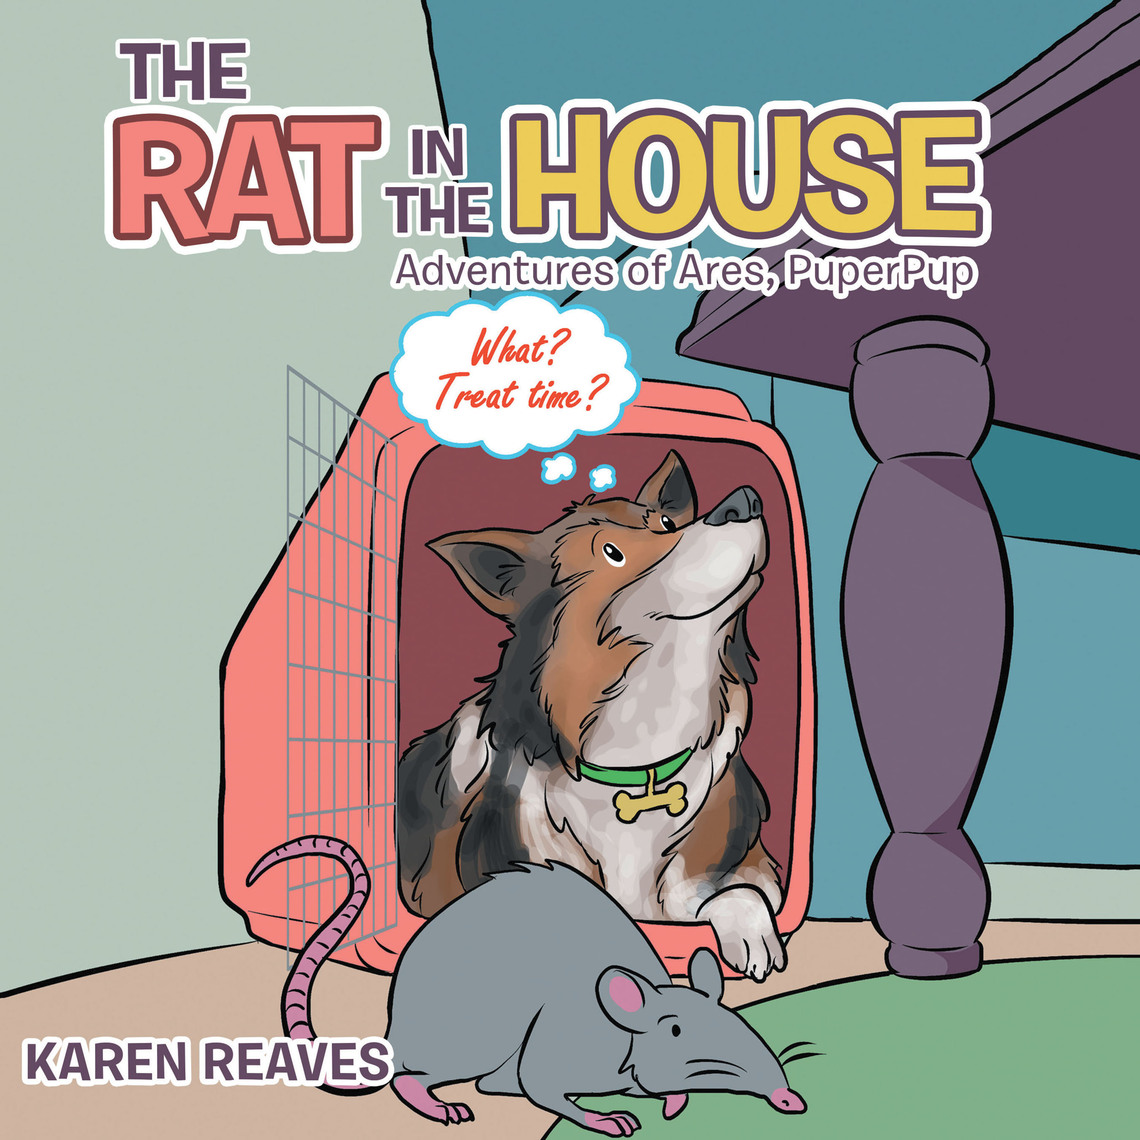 The Rat in the House by Karen Reaves